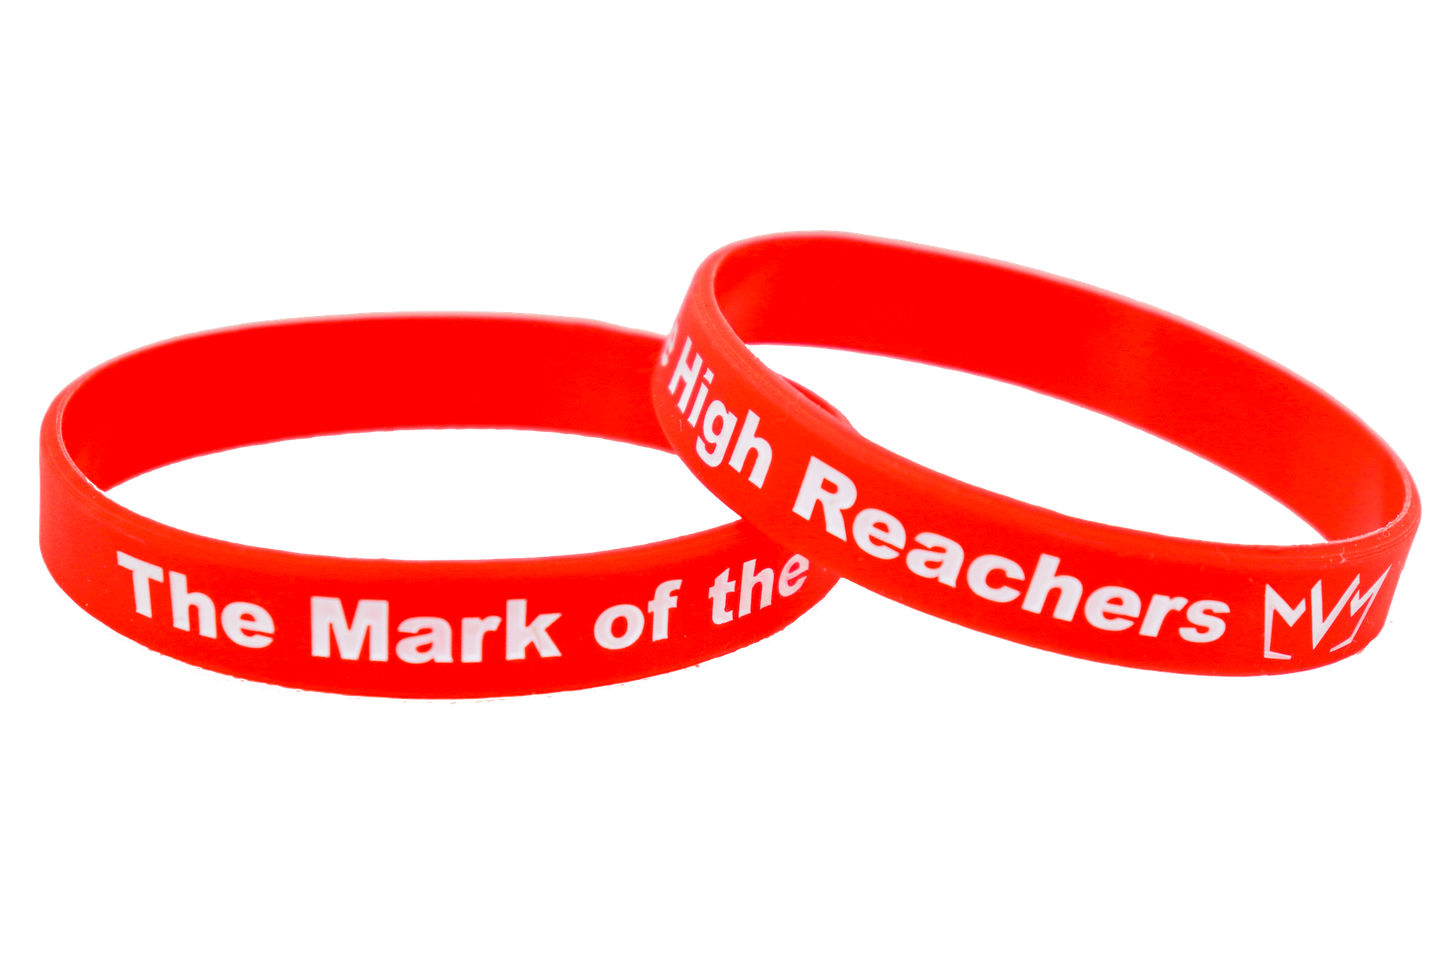 The Mark of the High Reachers Silicone Wristband in red.